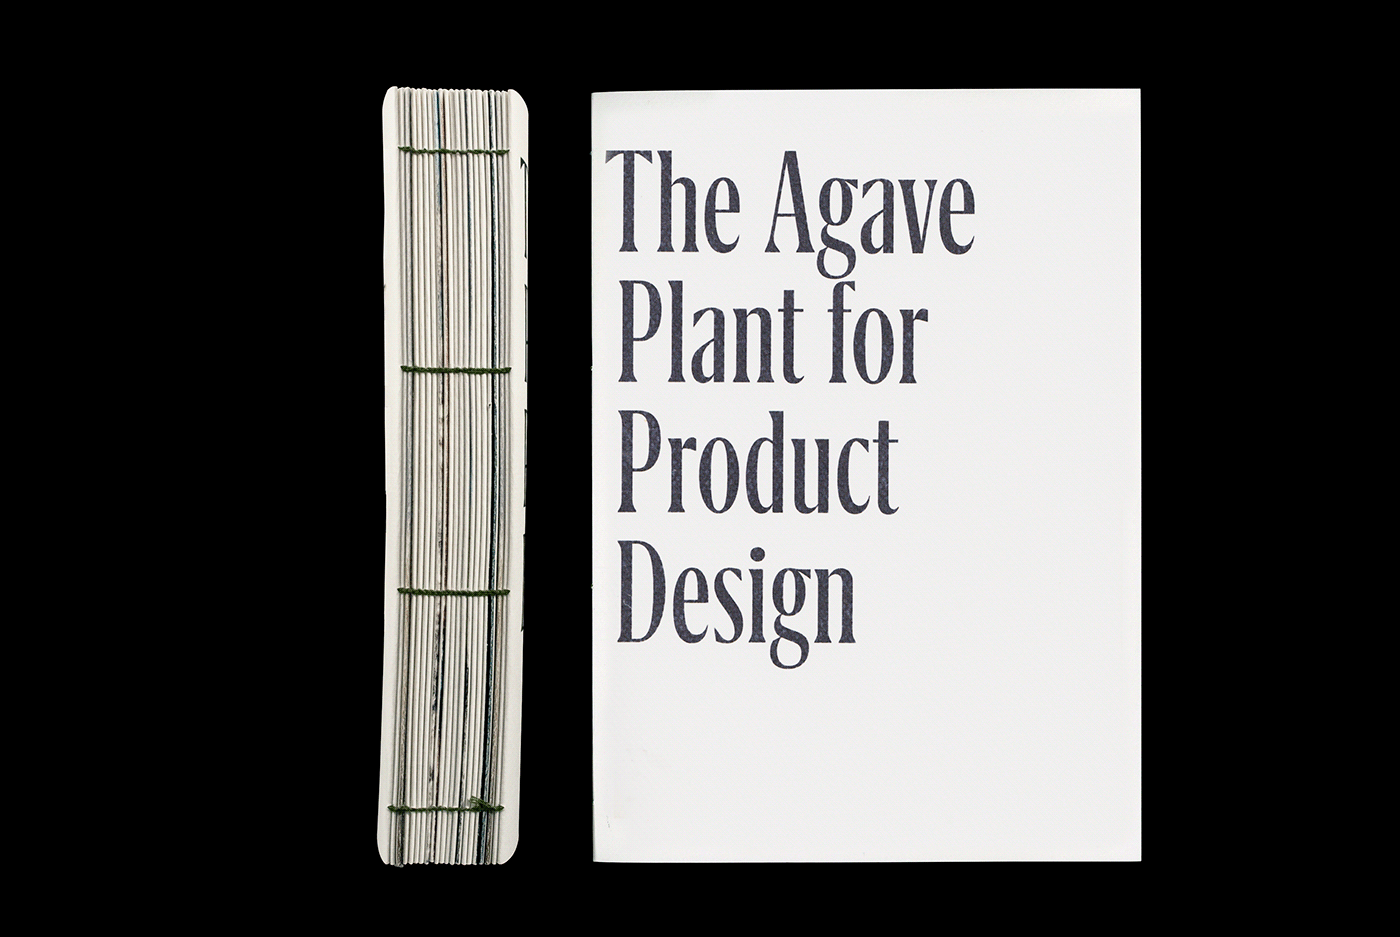 Product Page screen design idea #291: The Agave Plant for Product Design